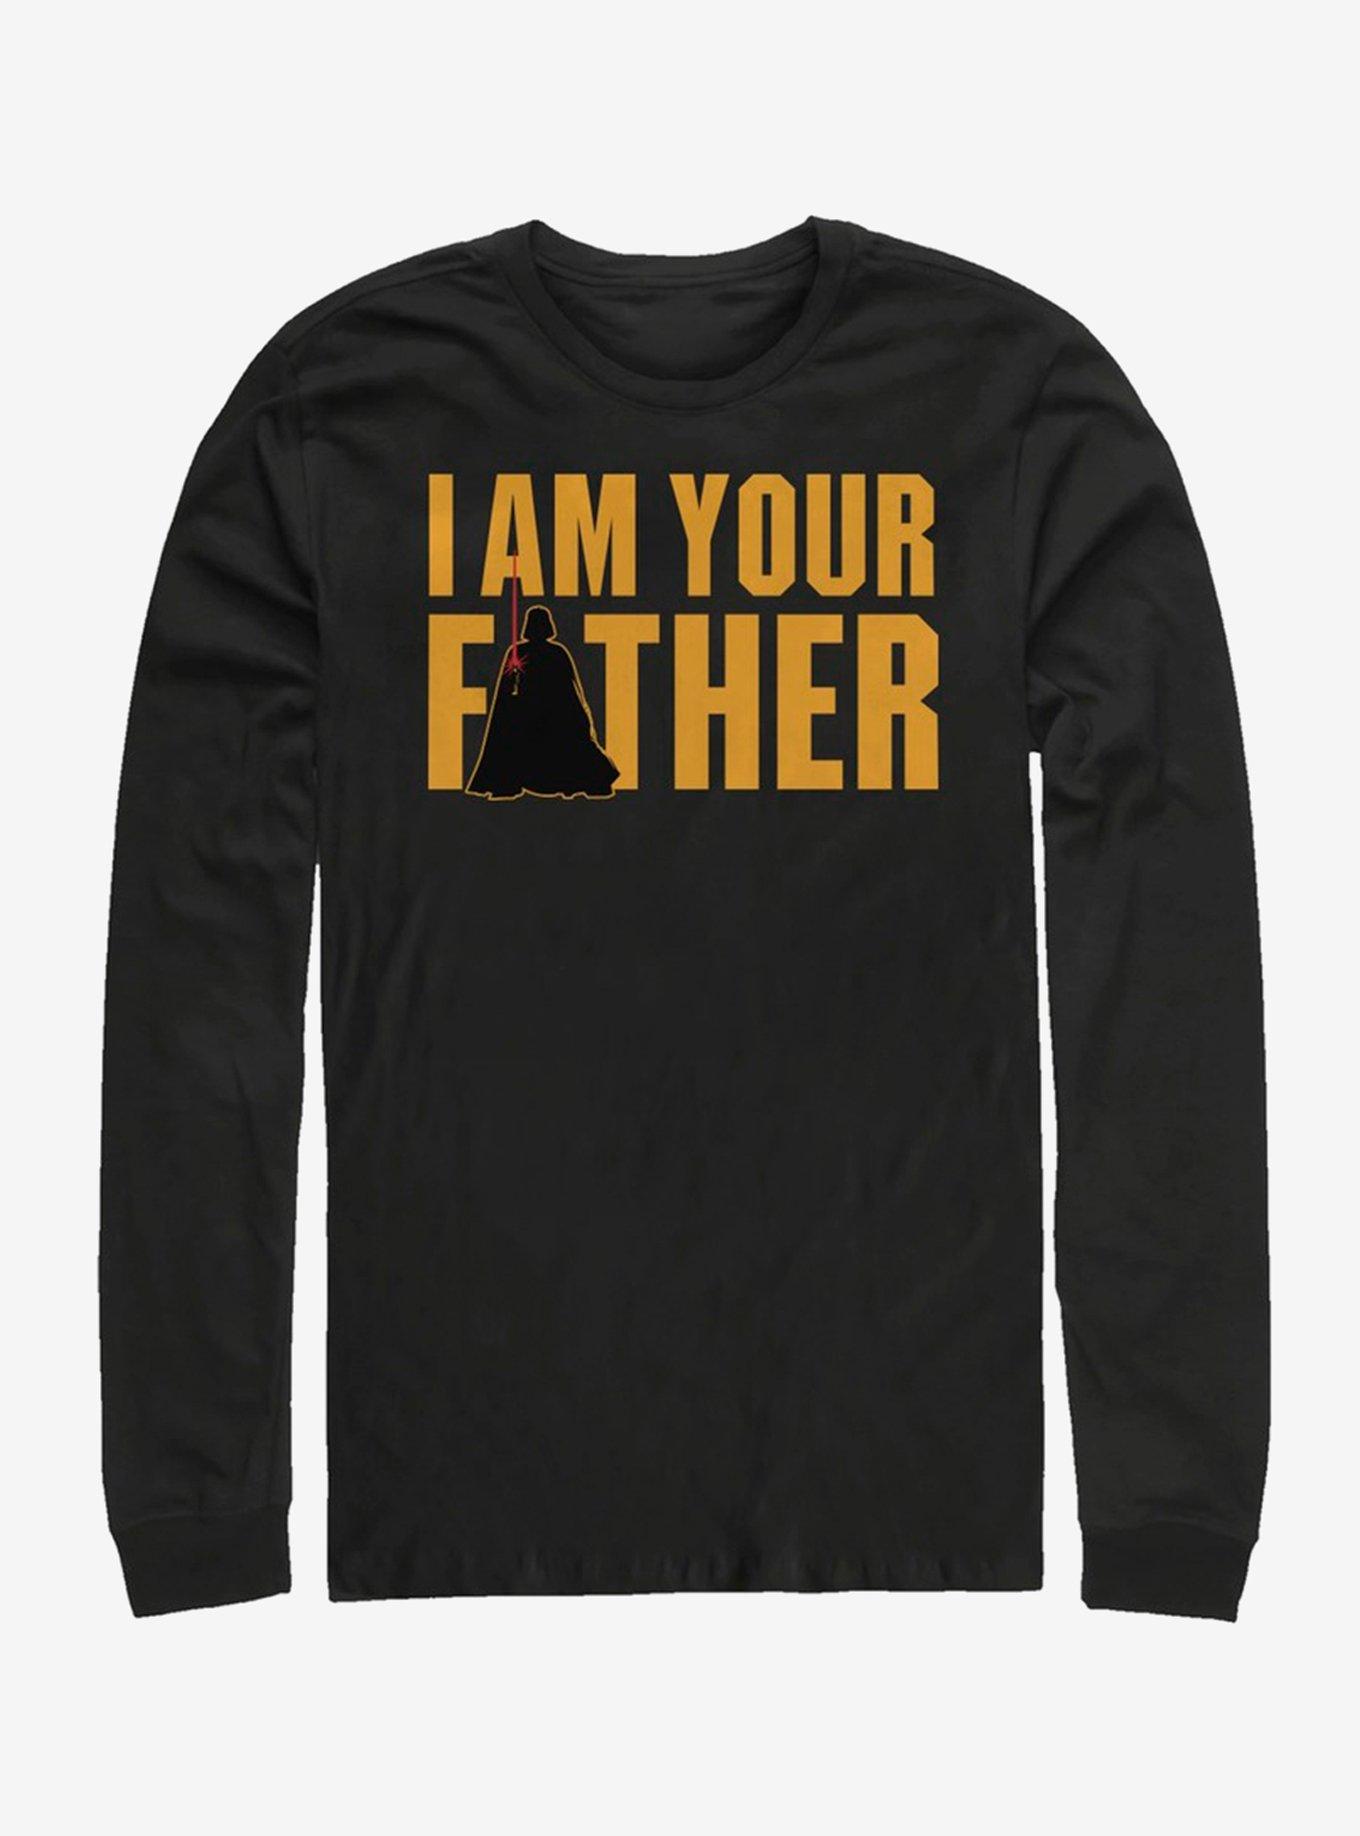 Star Wars Father's Day Long-Sleeve T-Shirt, BLACK, hi-res